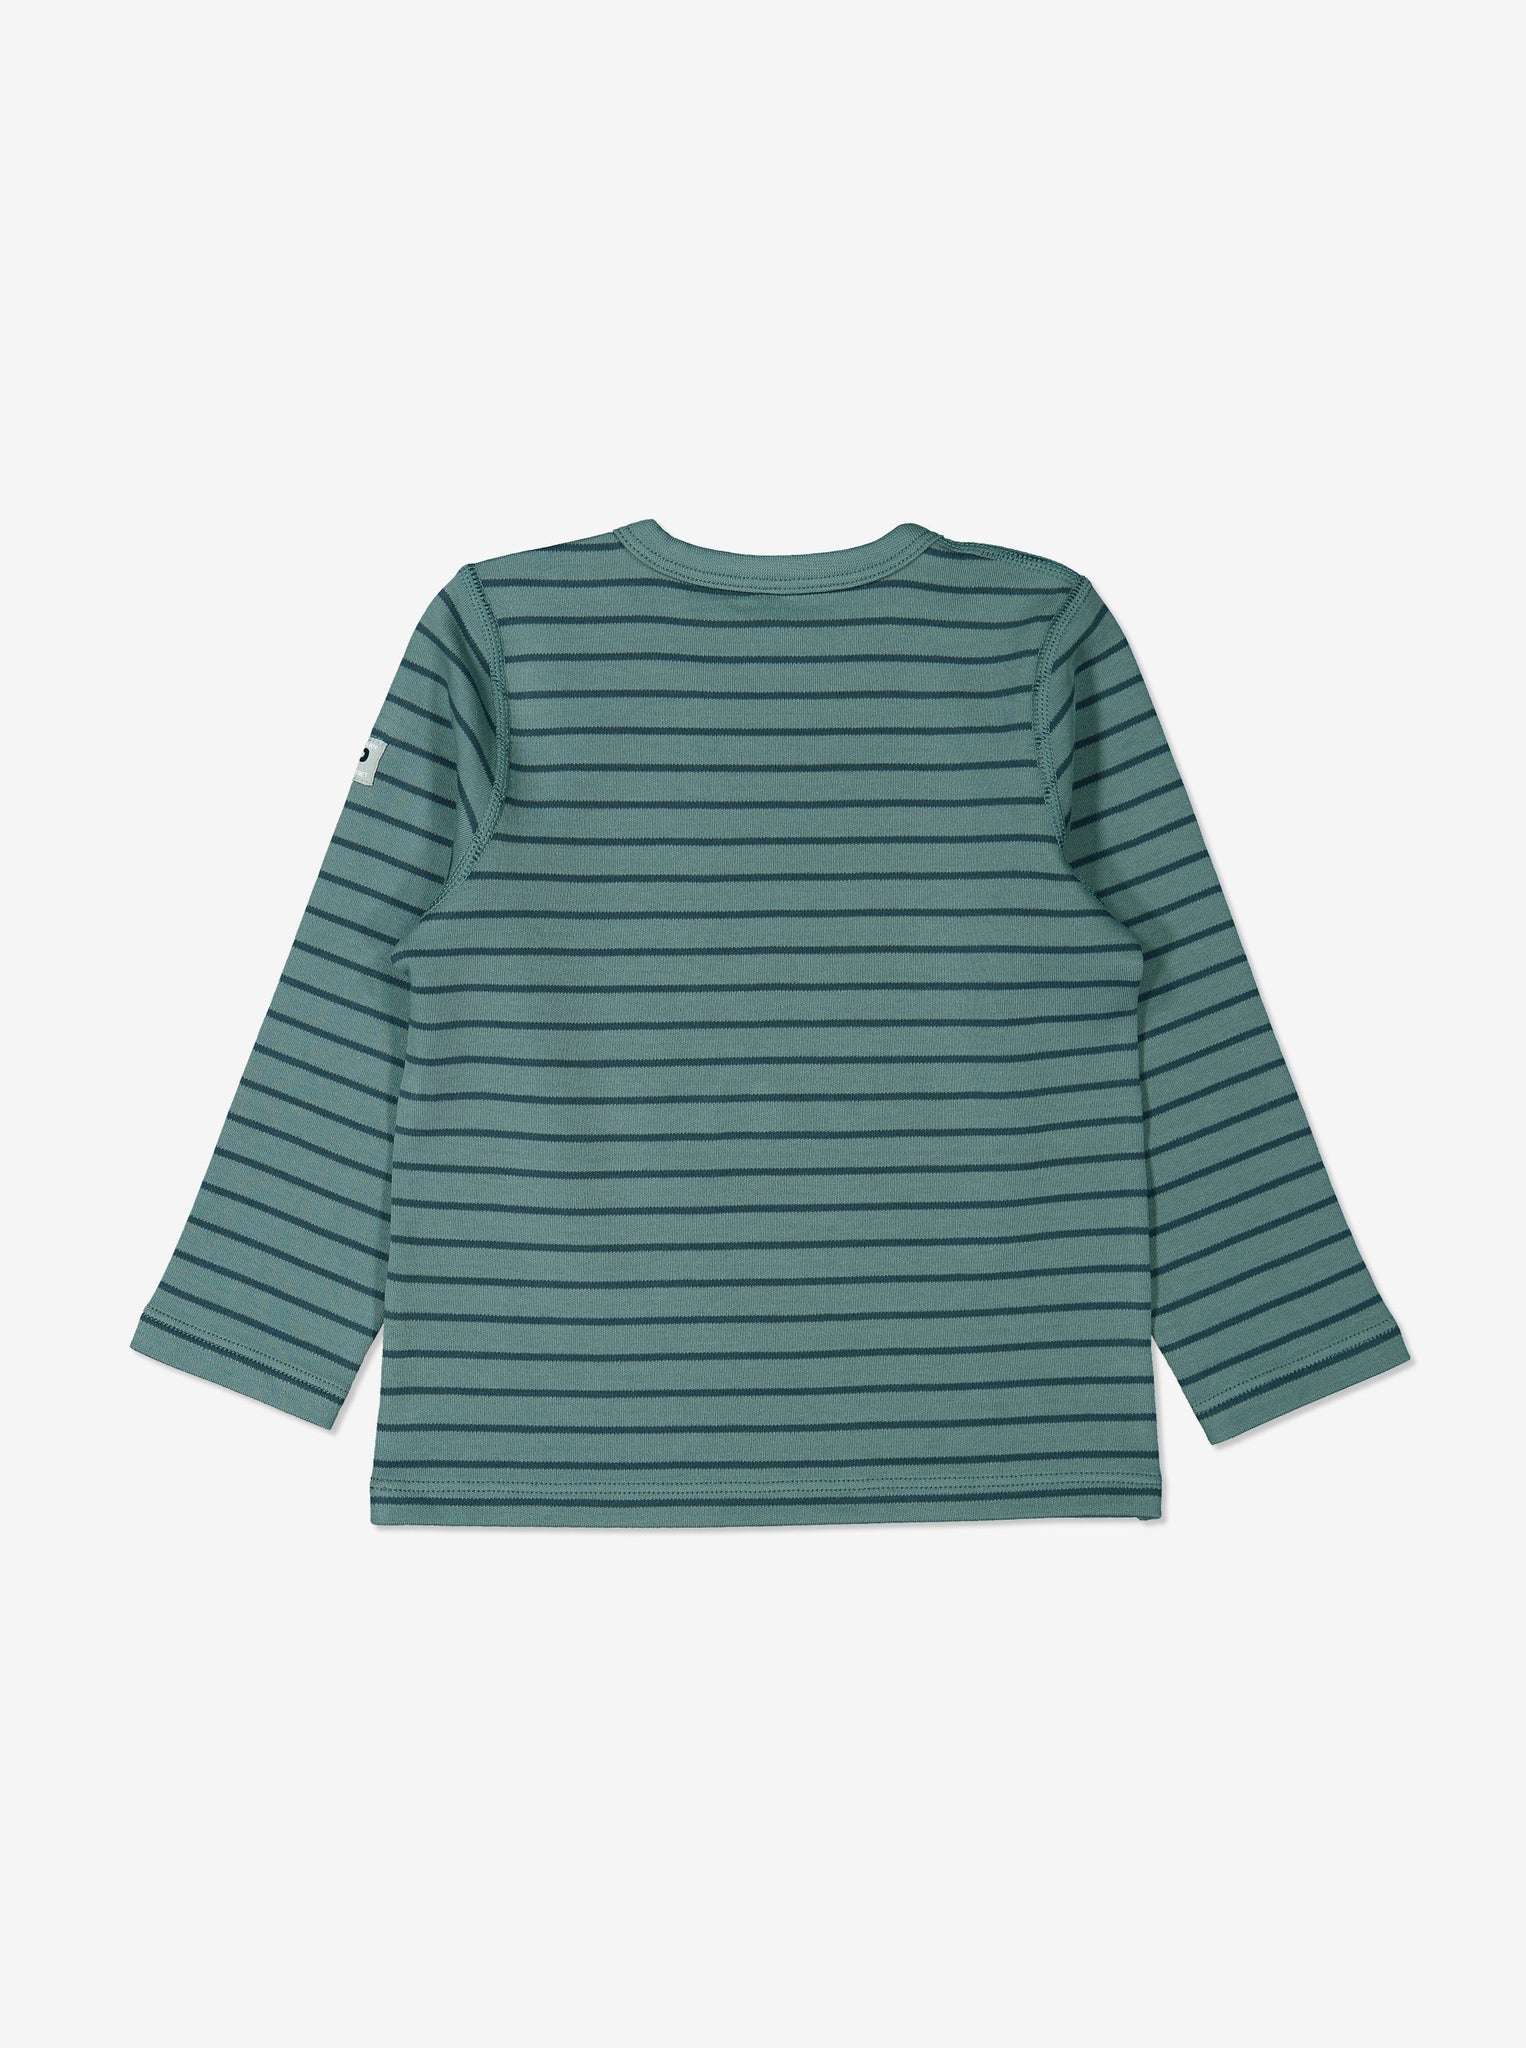 Unisex Organic Baby Top, Ethical Baby Clothes | Polarn O. Pyret UK